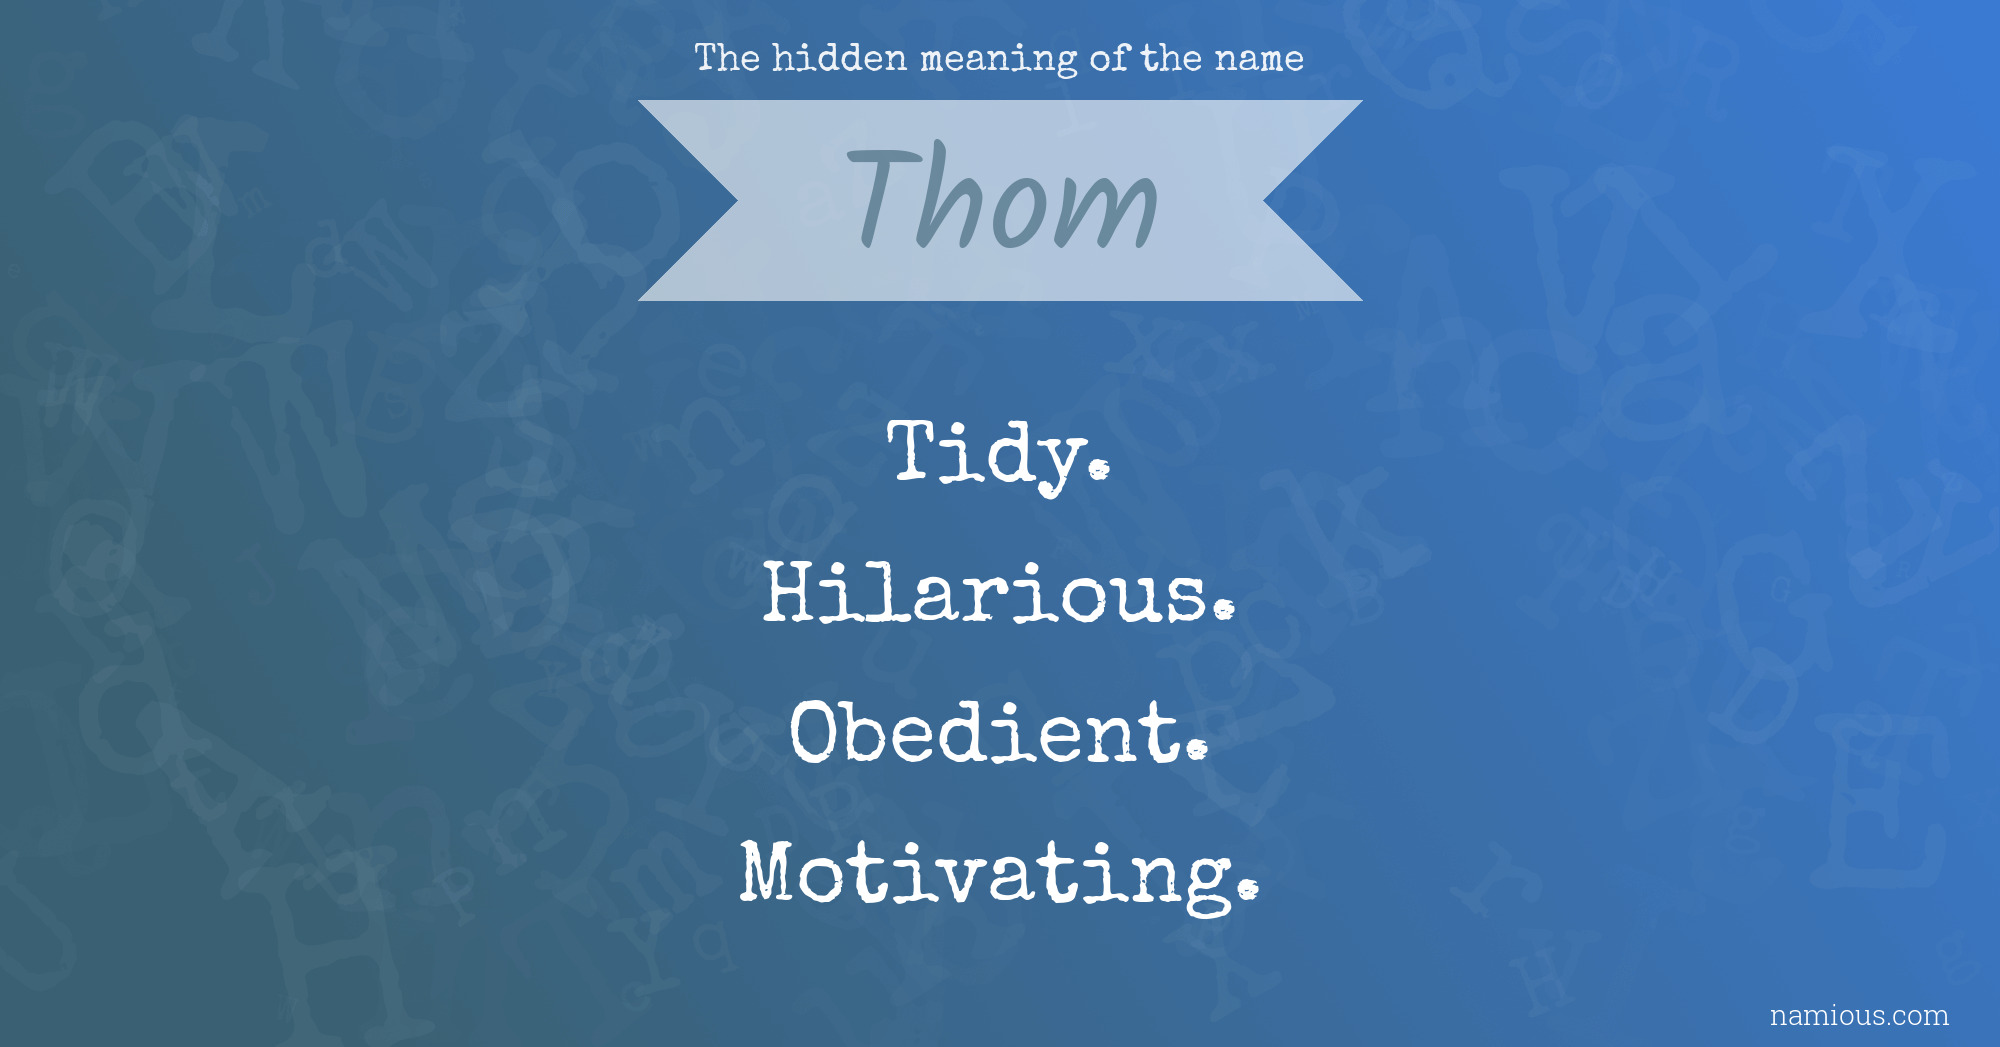 The hidden meaning of the name Thom